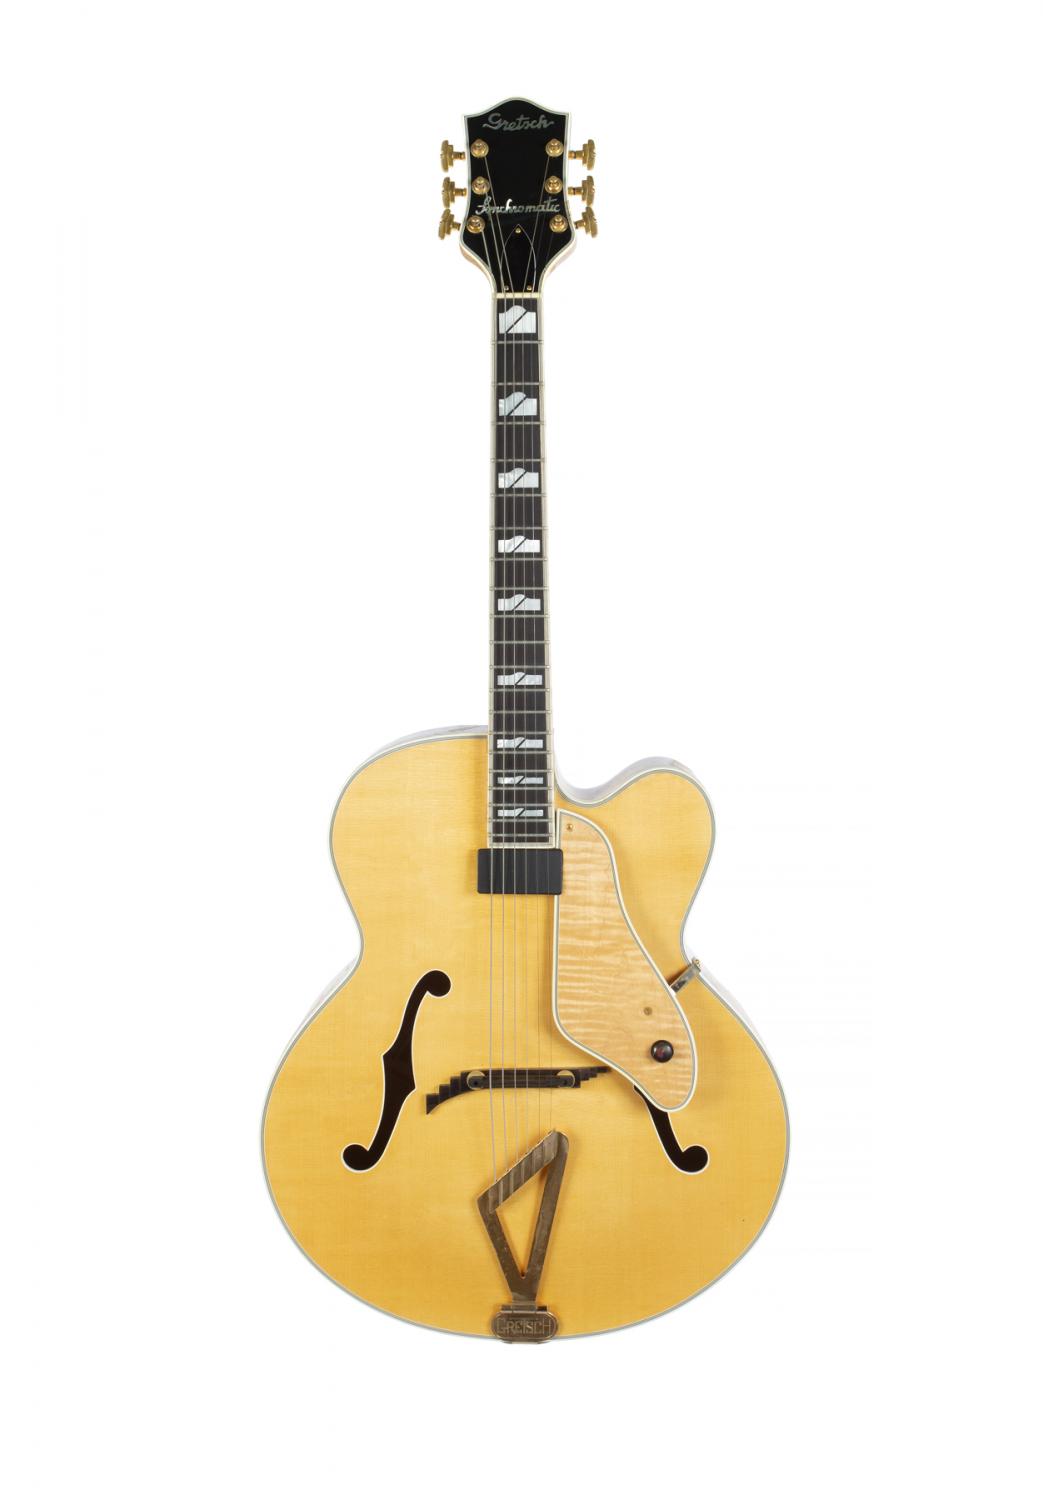 Do you dig Gretschs? Check out these.......-382811_0-jpg